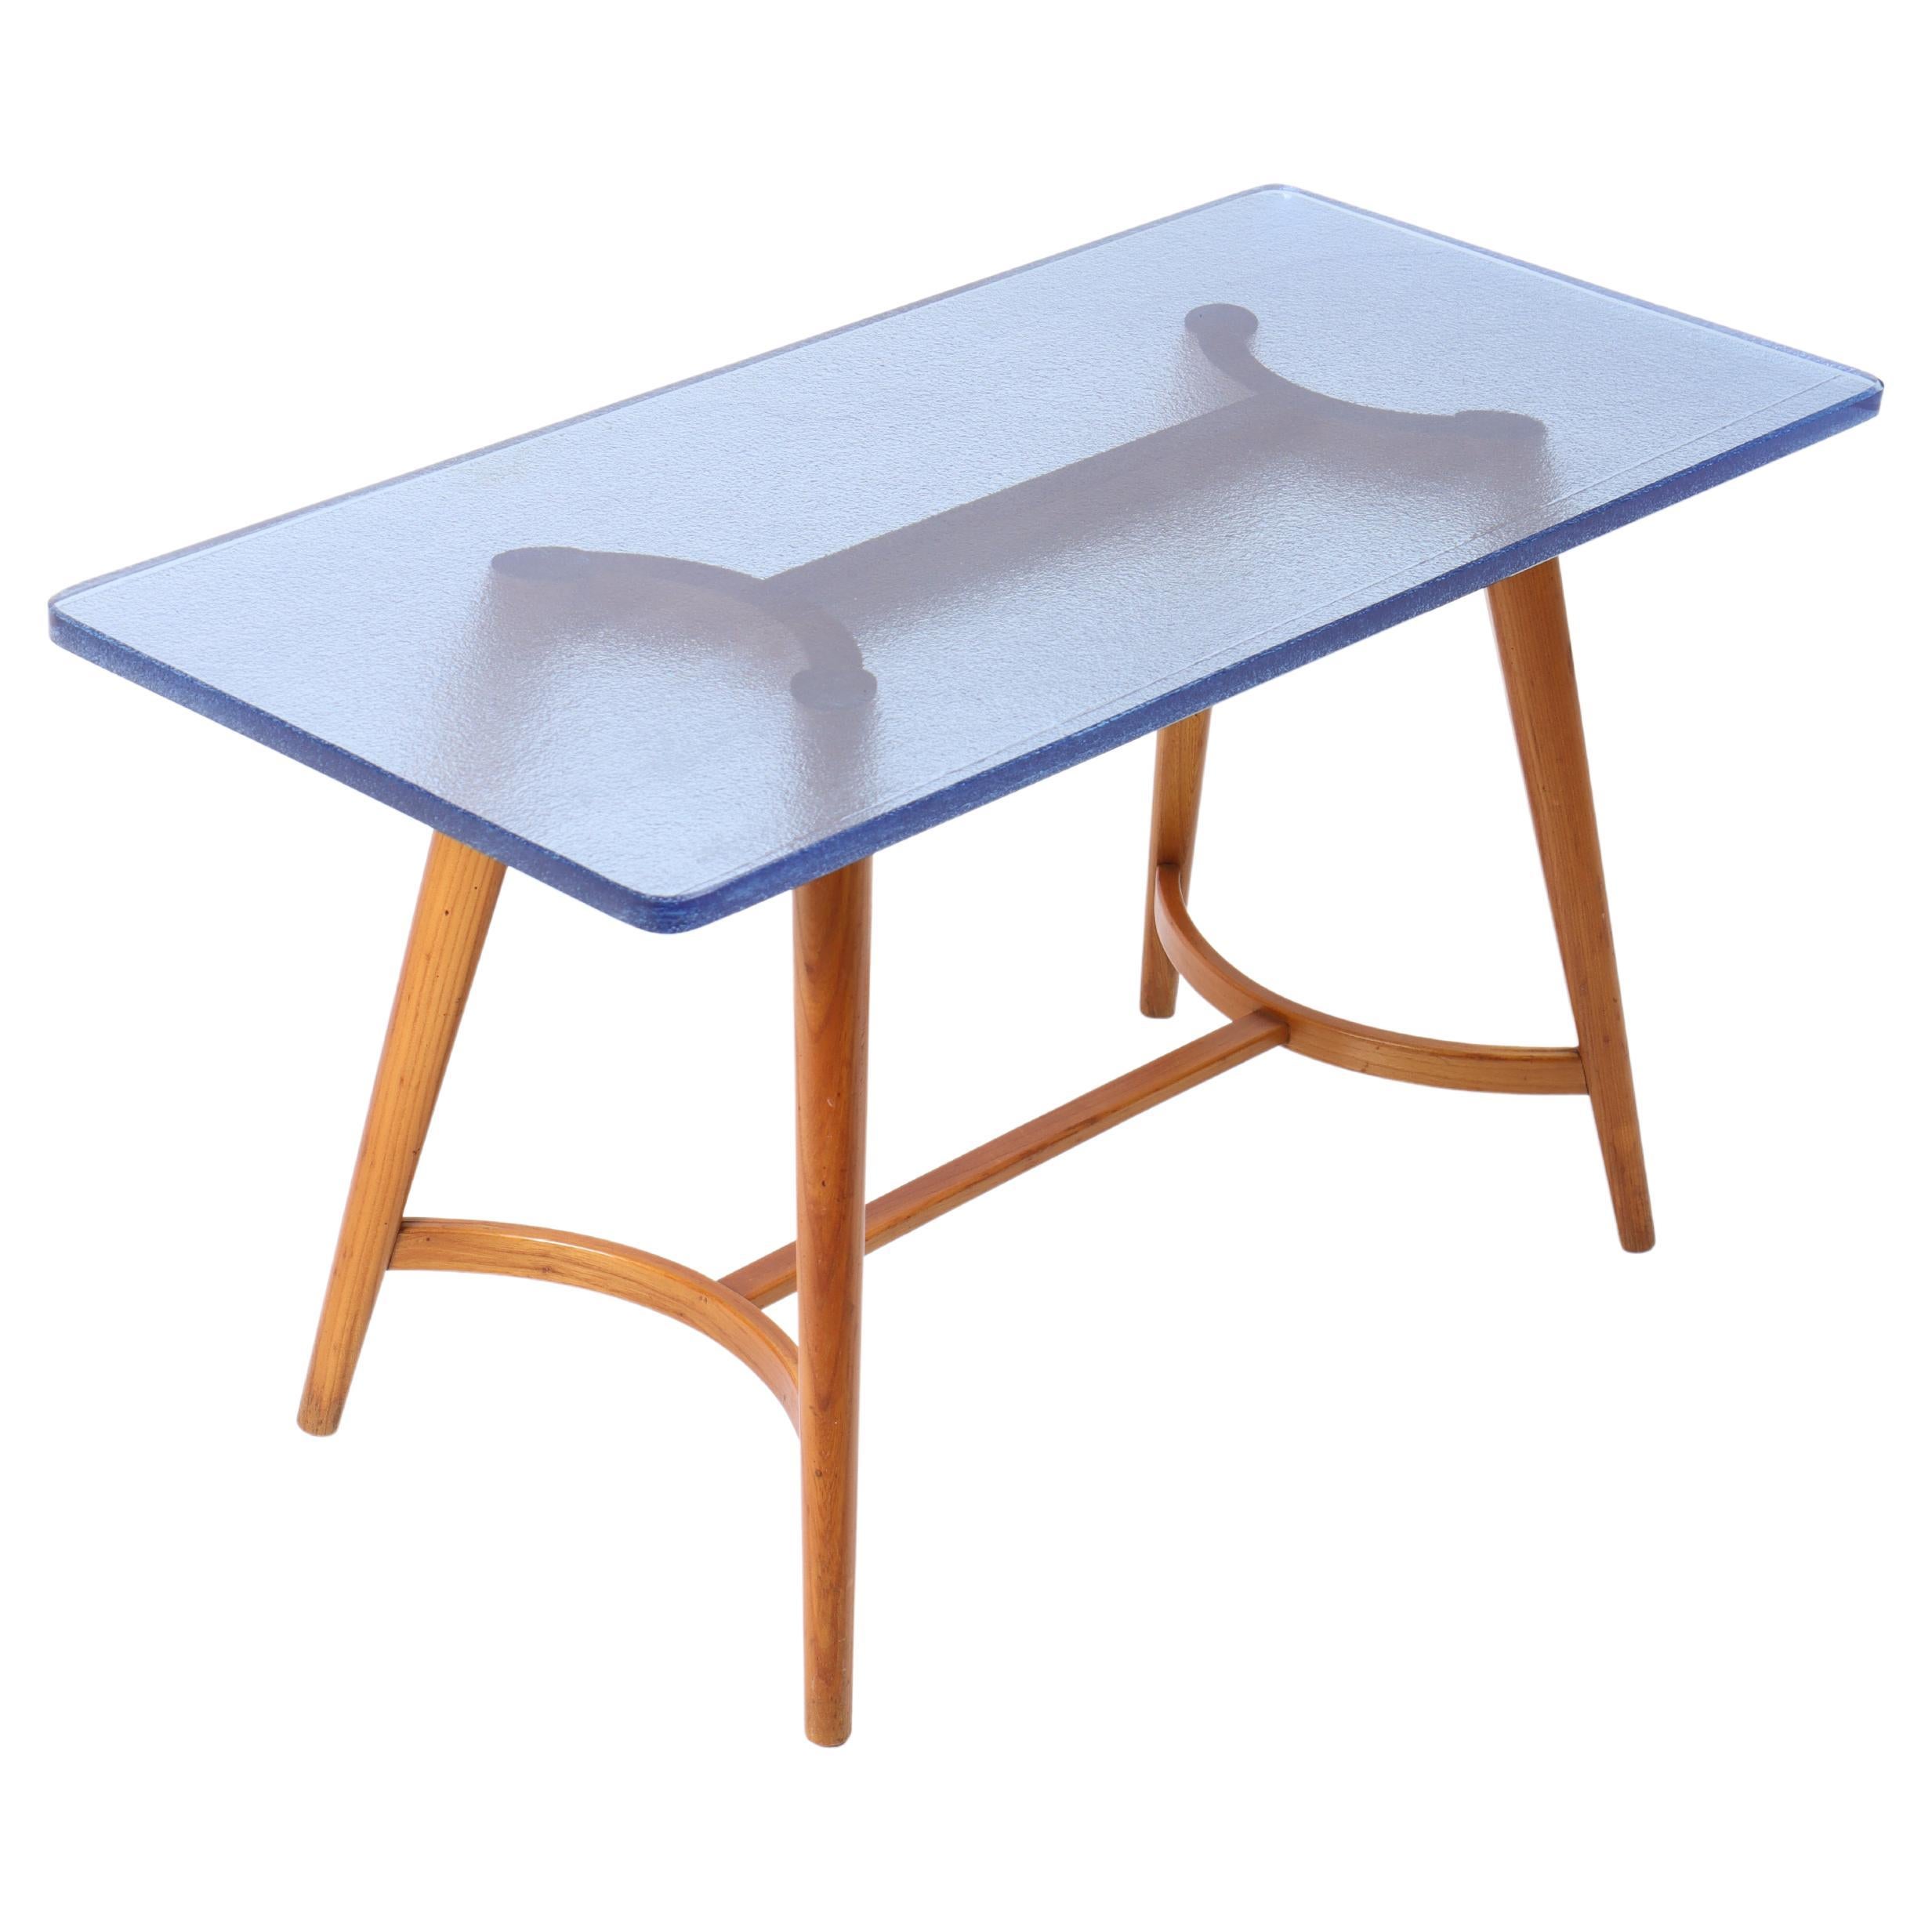 Midcentury Low Table in Glass and Elm, Made in Denmark, 1950s For Sale